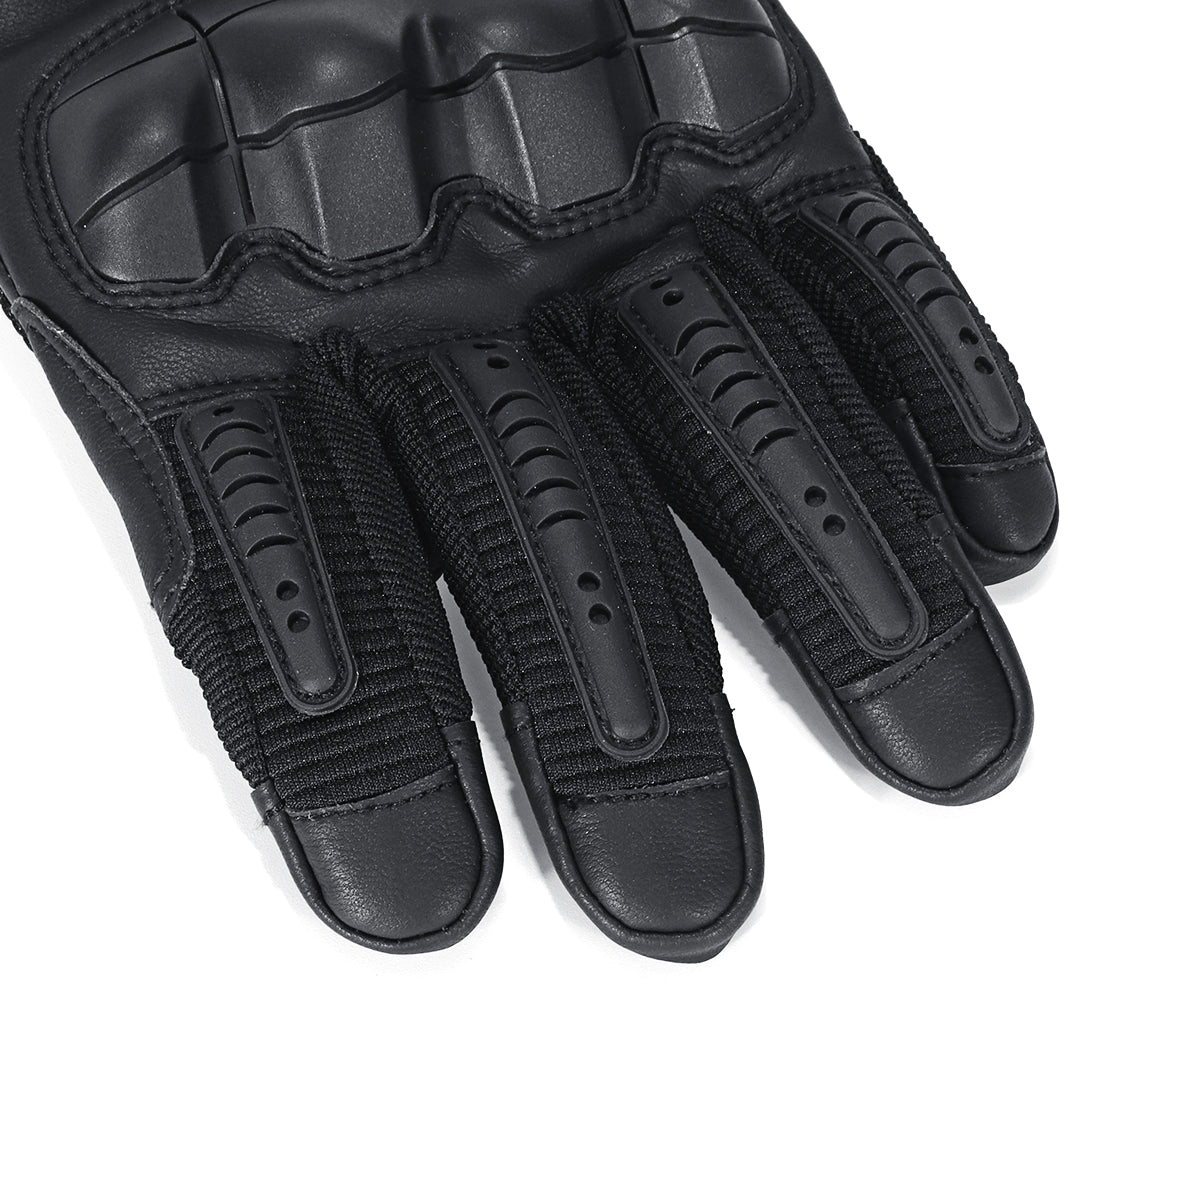 Dark Slate Gray Touch Screen Motorcycle Full Finger Military Tactical Gloves Motorbike Driving